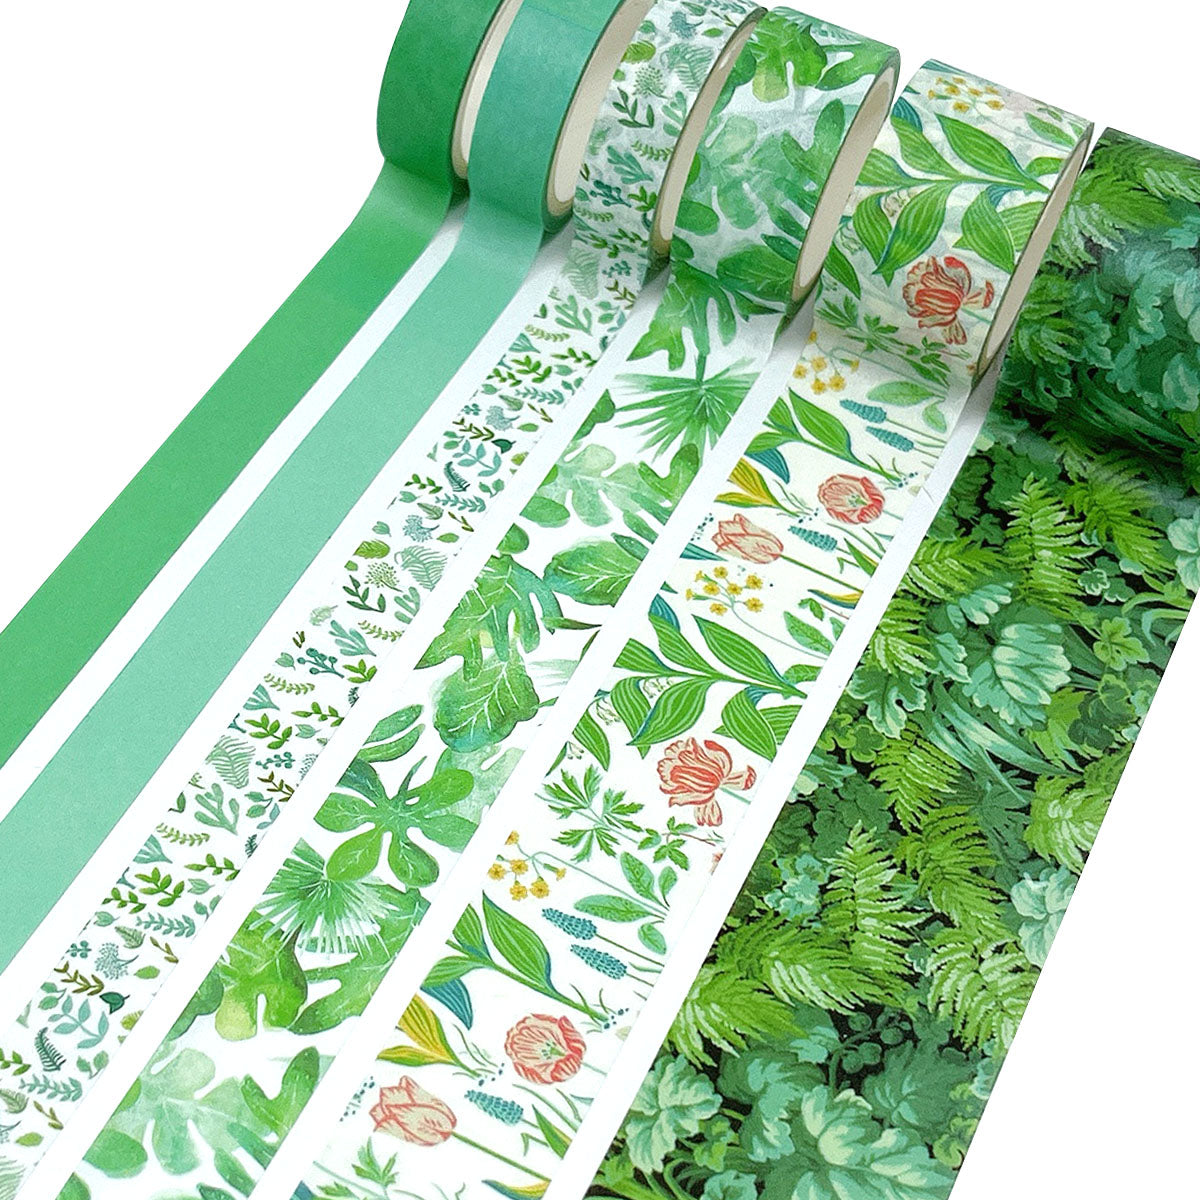 12 Rolls Green Washi Tape Set Leaves Floral Washi Masking Tape Colorful  Decorative Painters Tape For Scrapbook Gift Wrapping - Washi Tape -  AliExpress